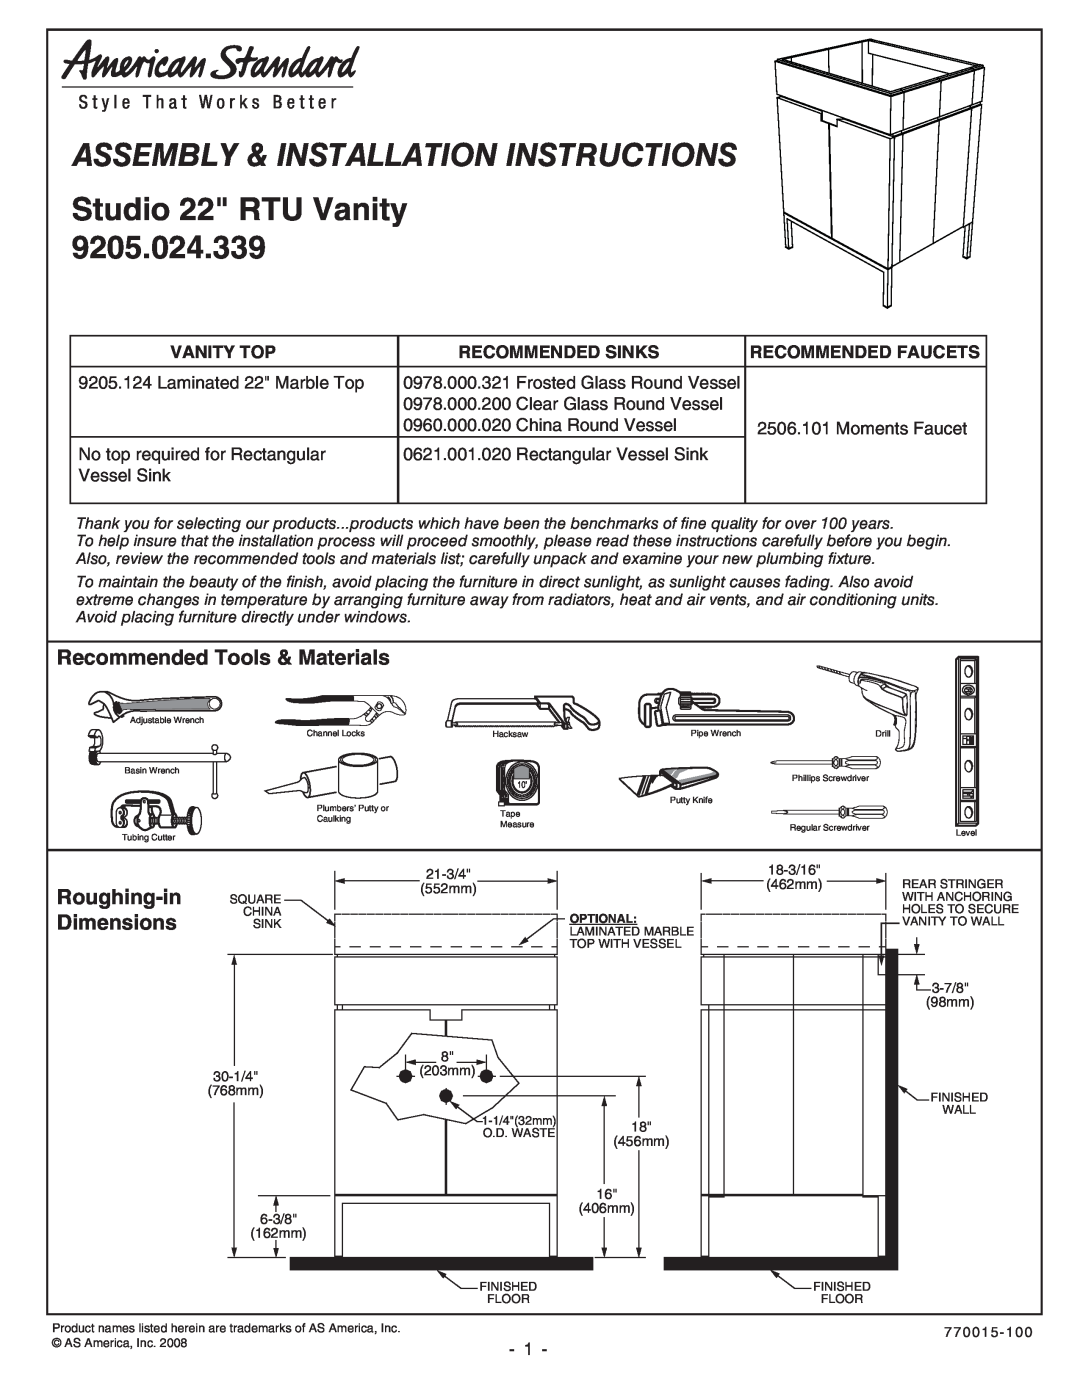 American Standard 9205.024.339 installation instructions Recommended Tools & Materials, Roughing-inDimensions, Vanity Top 